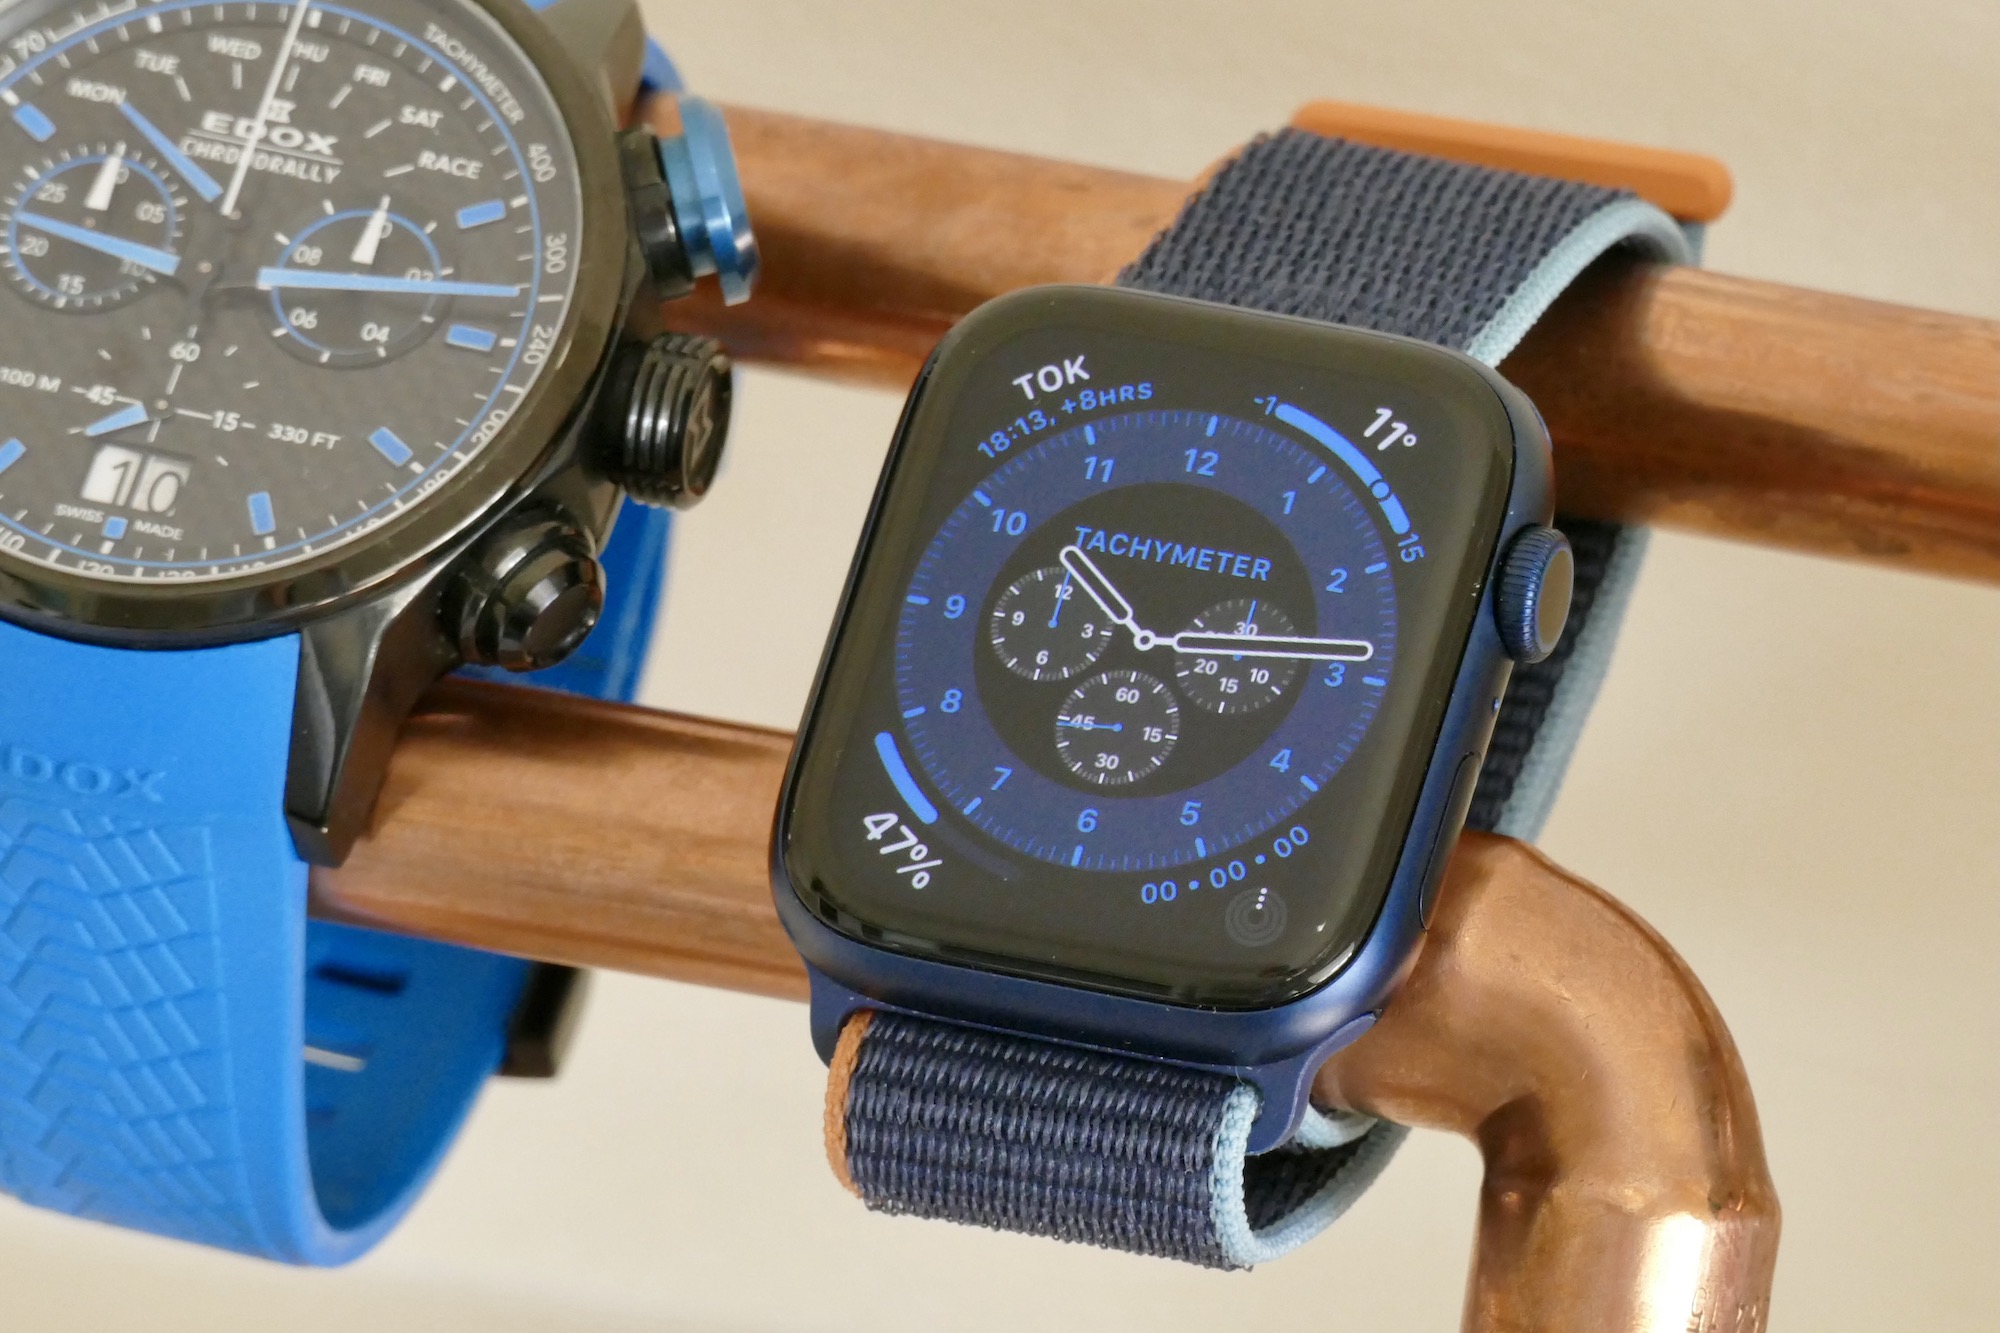 Apple Watch 40mm vs. 44mm: Which Apple Watch size should you get? | iMore